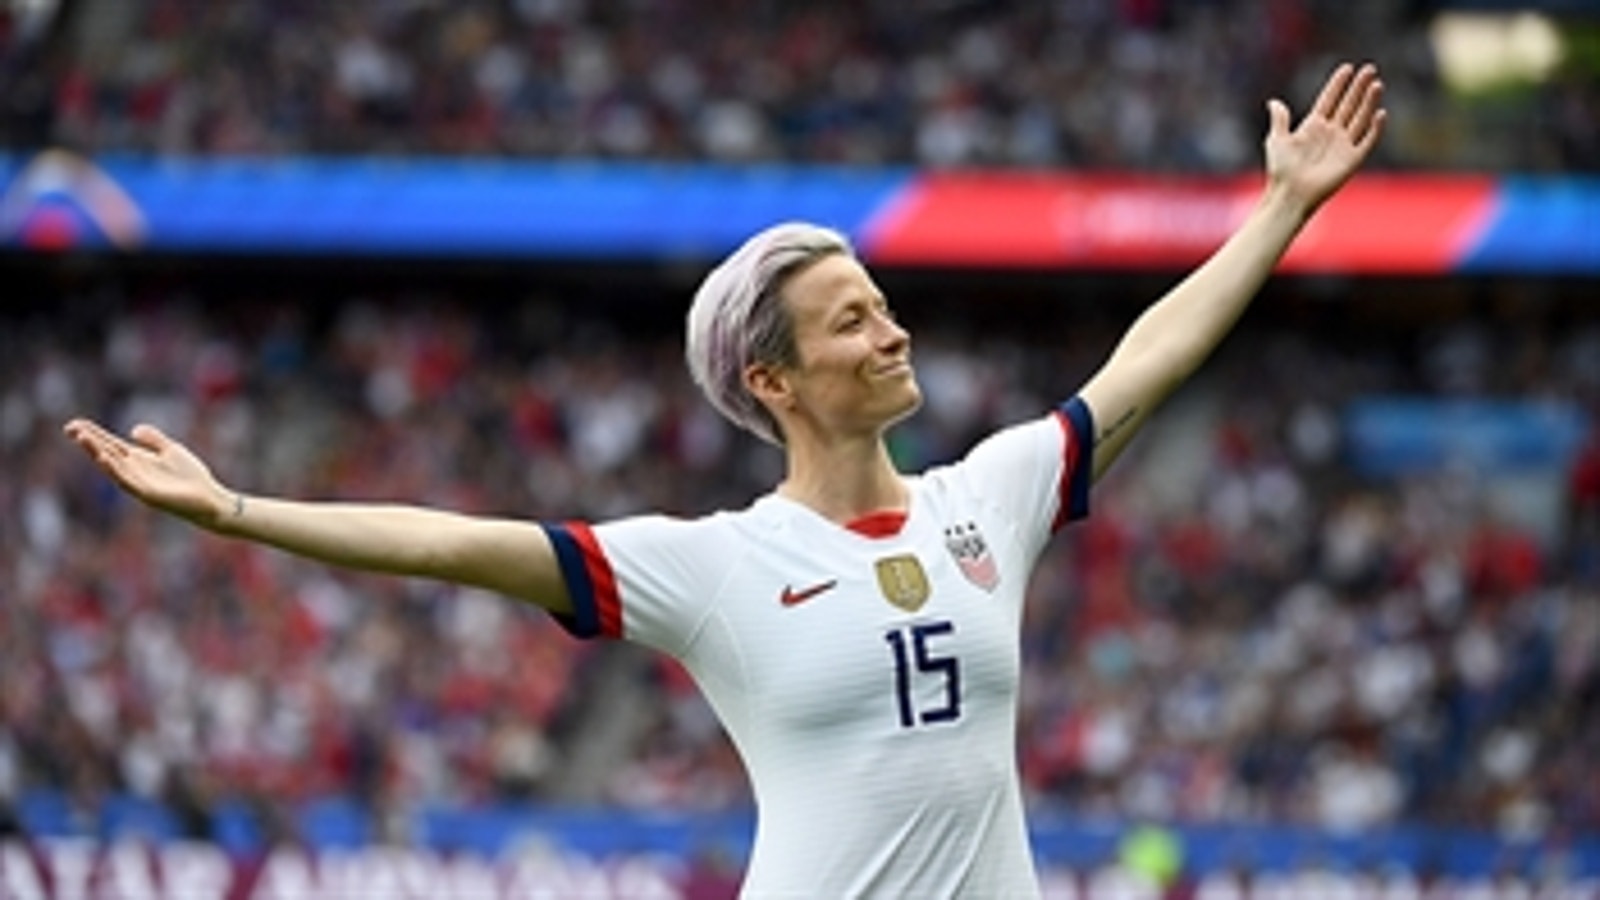 United States' Megan Rapinoe scores free kick for a 1-0 lead, strikes pose against France